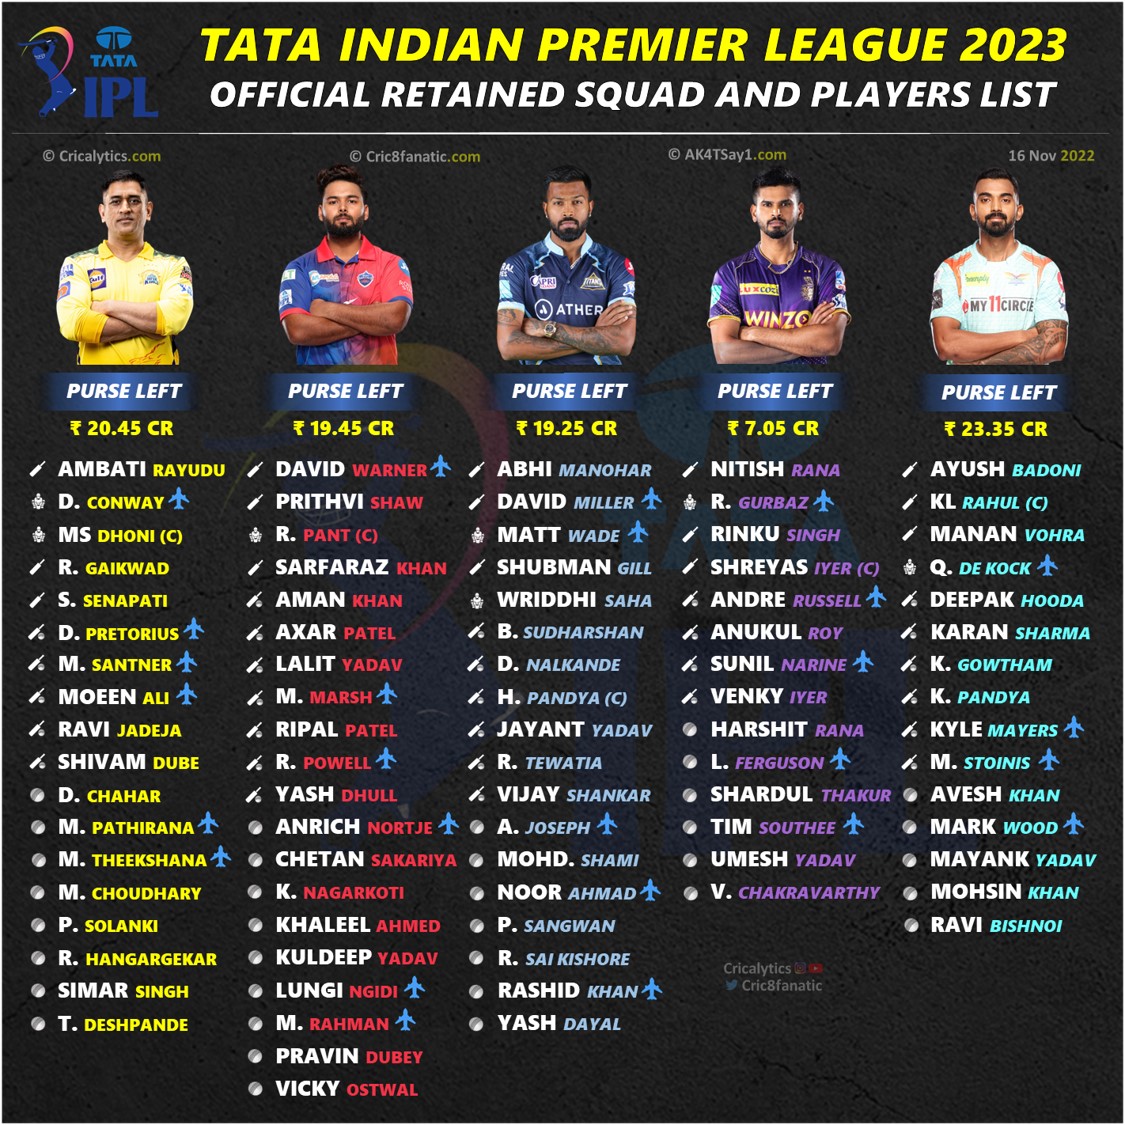 All Teams Purse and Players Slots For IPL 2023 Auction || IPL 2023 Auction  - YouTube